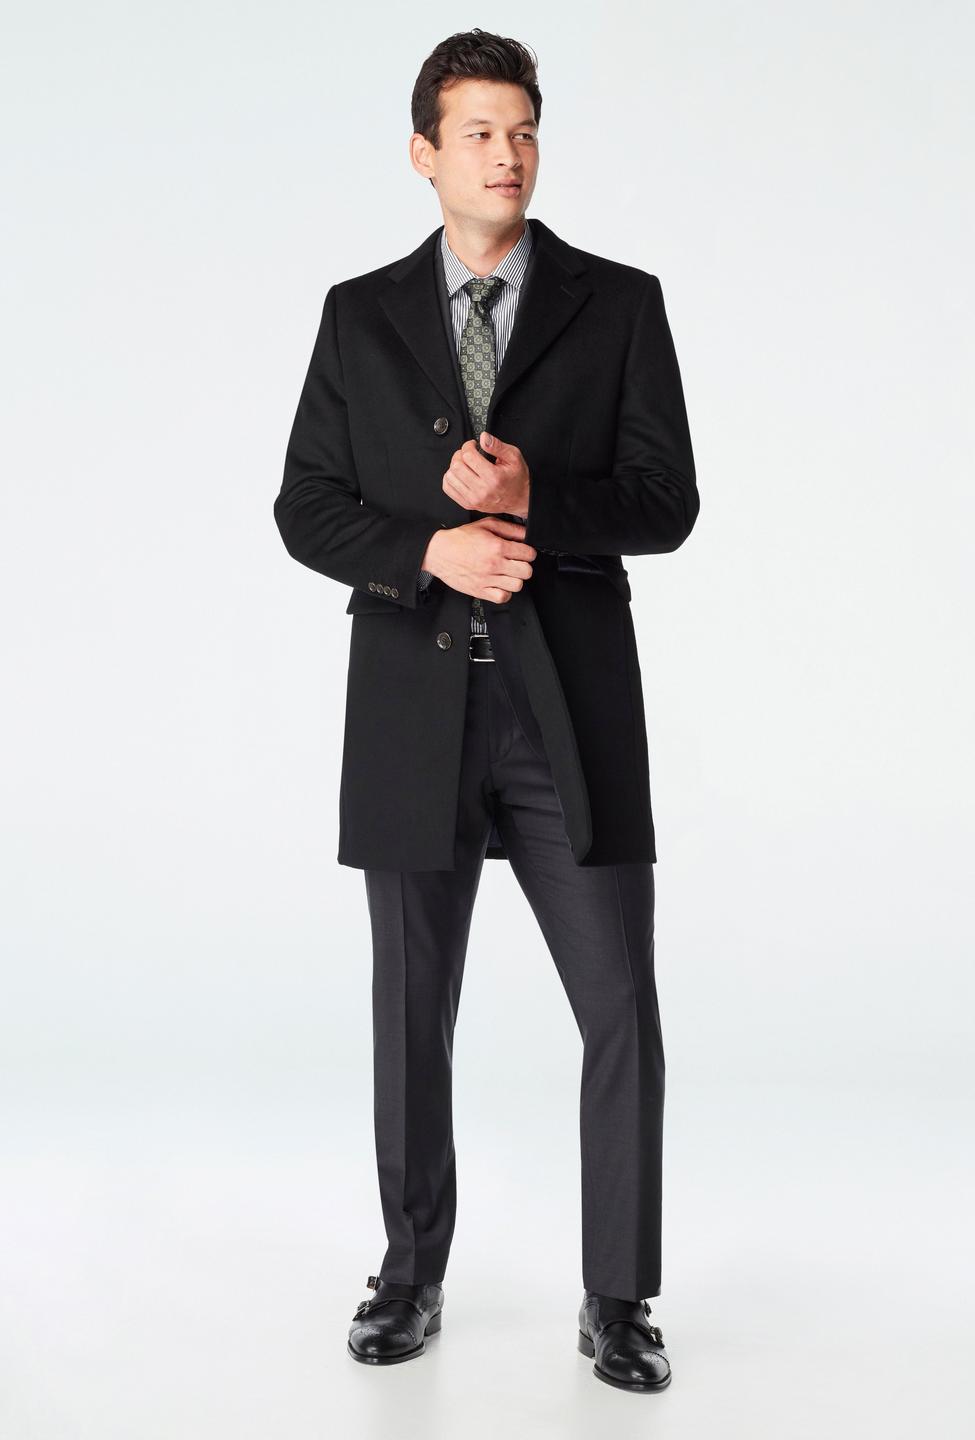 Black outerwear - Heartford Solid Design from Indochino Collection